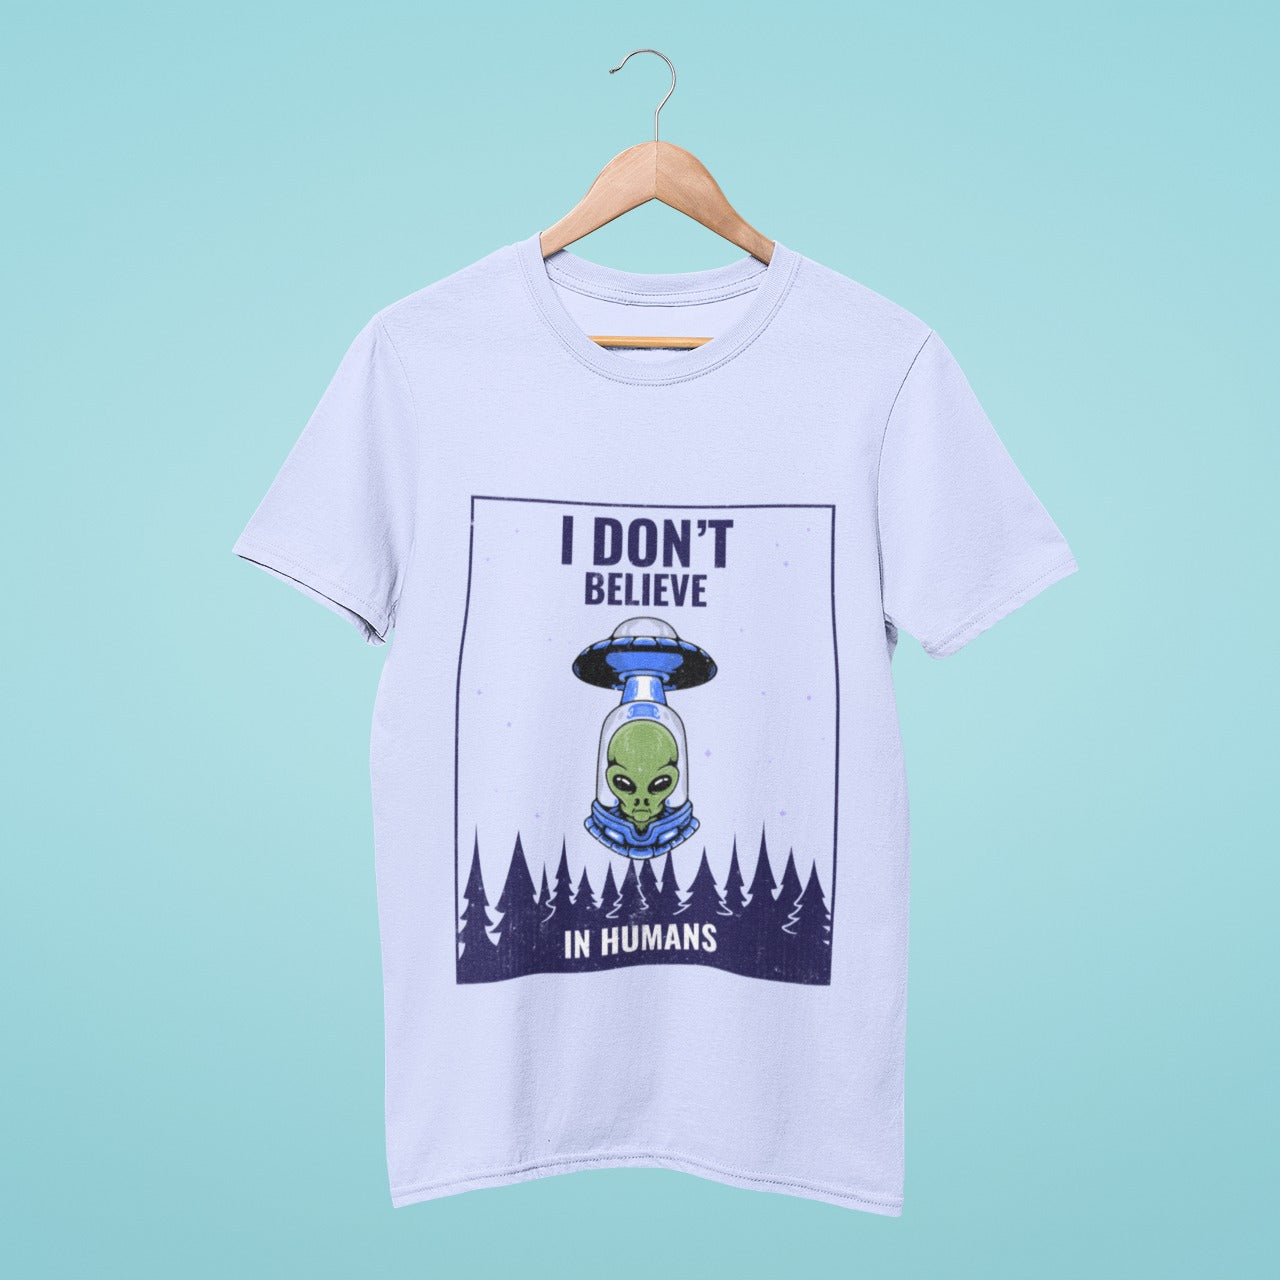 Get the ultimate extraterrestrial statement t-shirt. Light blue with a UFO and alien design and "I Don't Believe in Humans" quote. Comfortable, high-quality and perfect for alien enthusiasts. Showcase your love for the unknown. Order now!